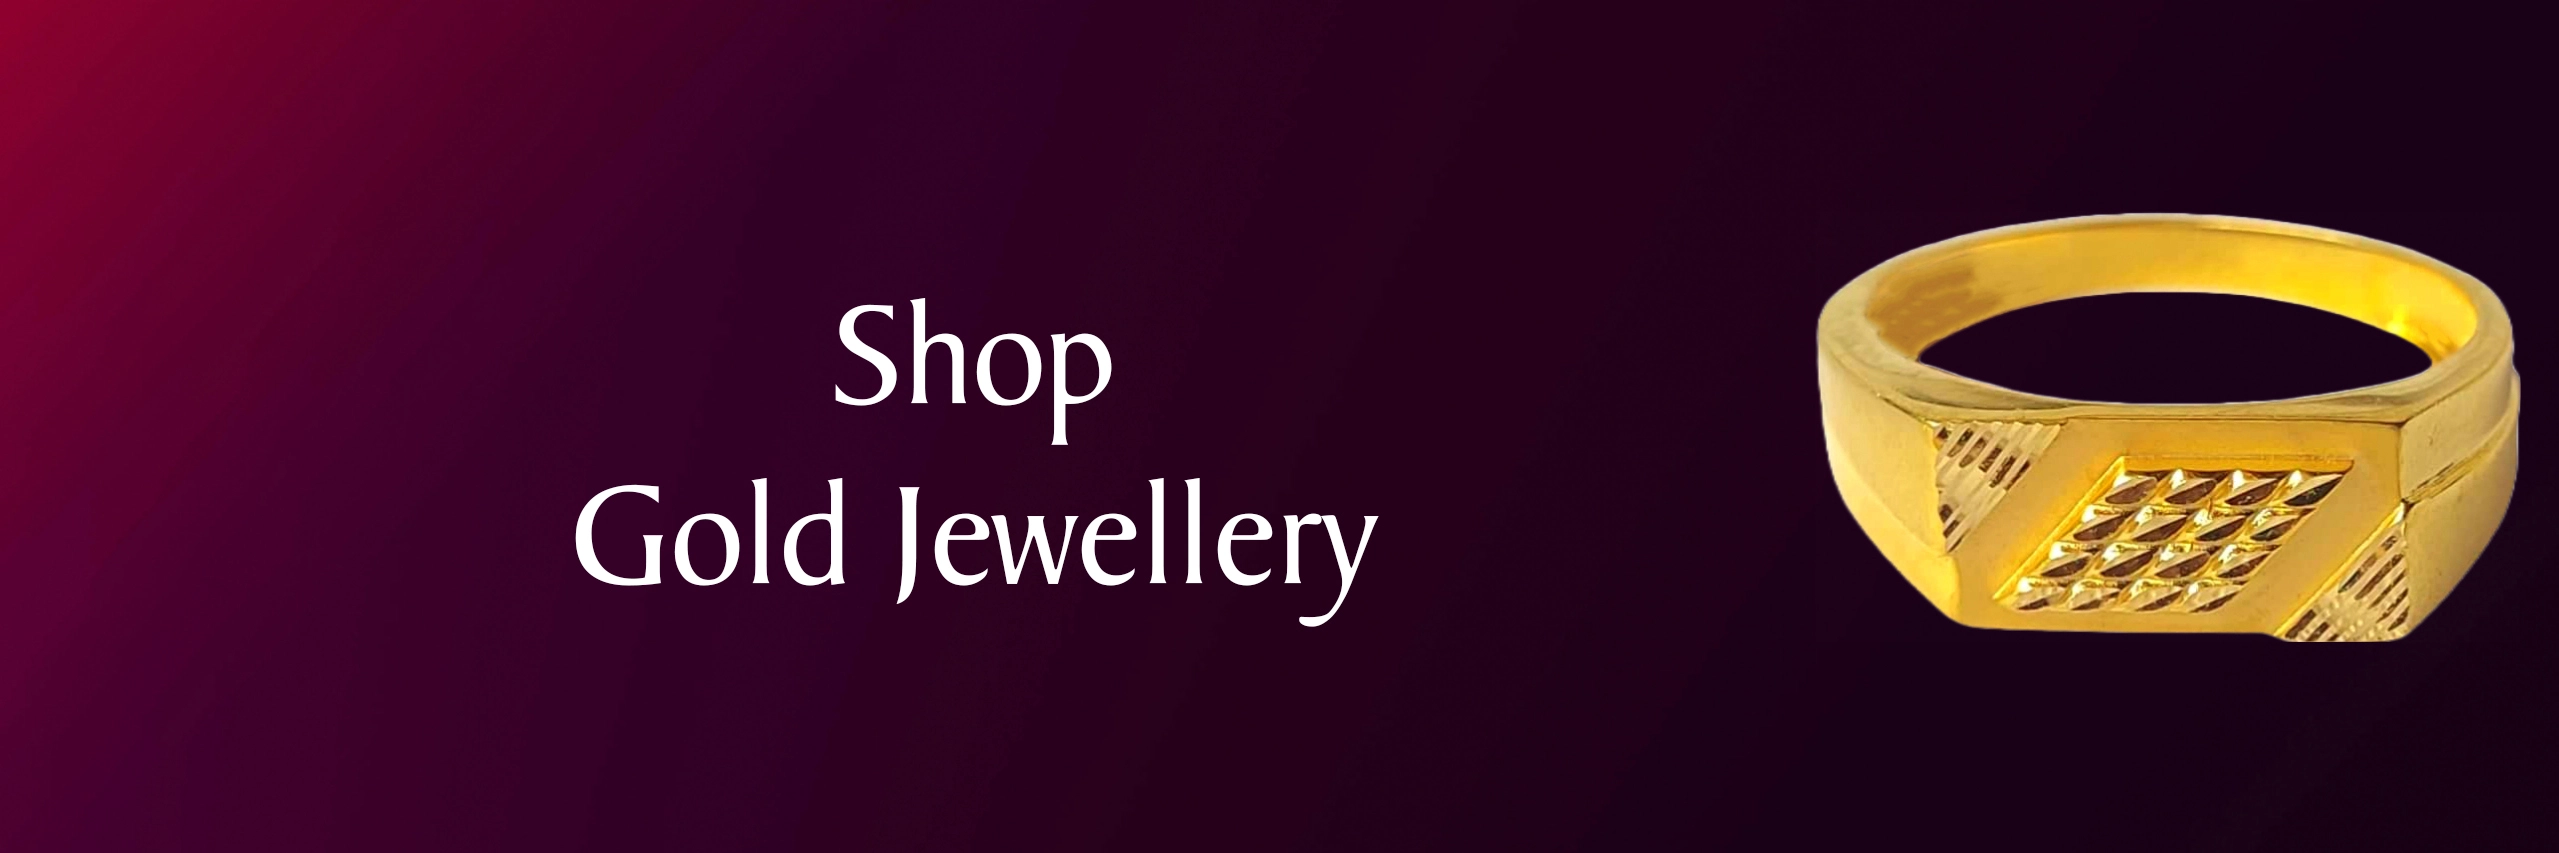 Shop-Gold-Jewellery-Banner-With-Text